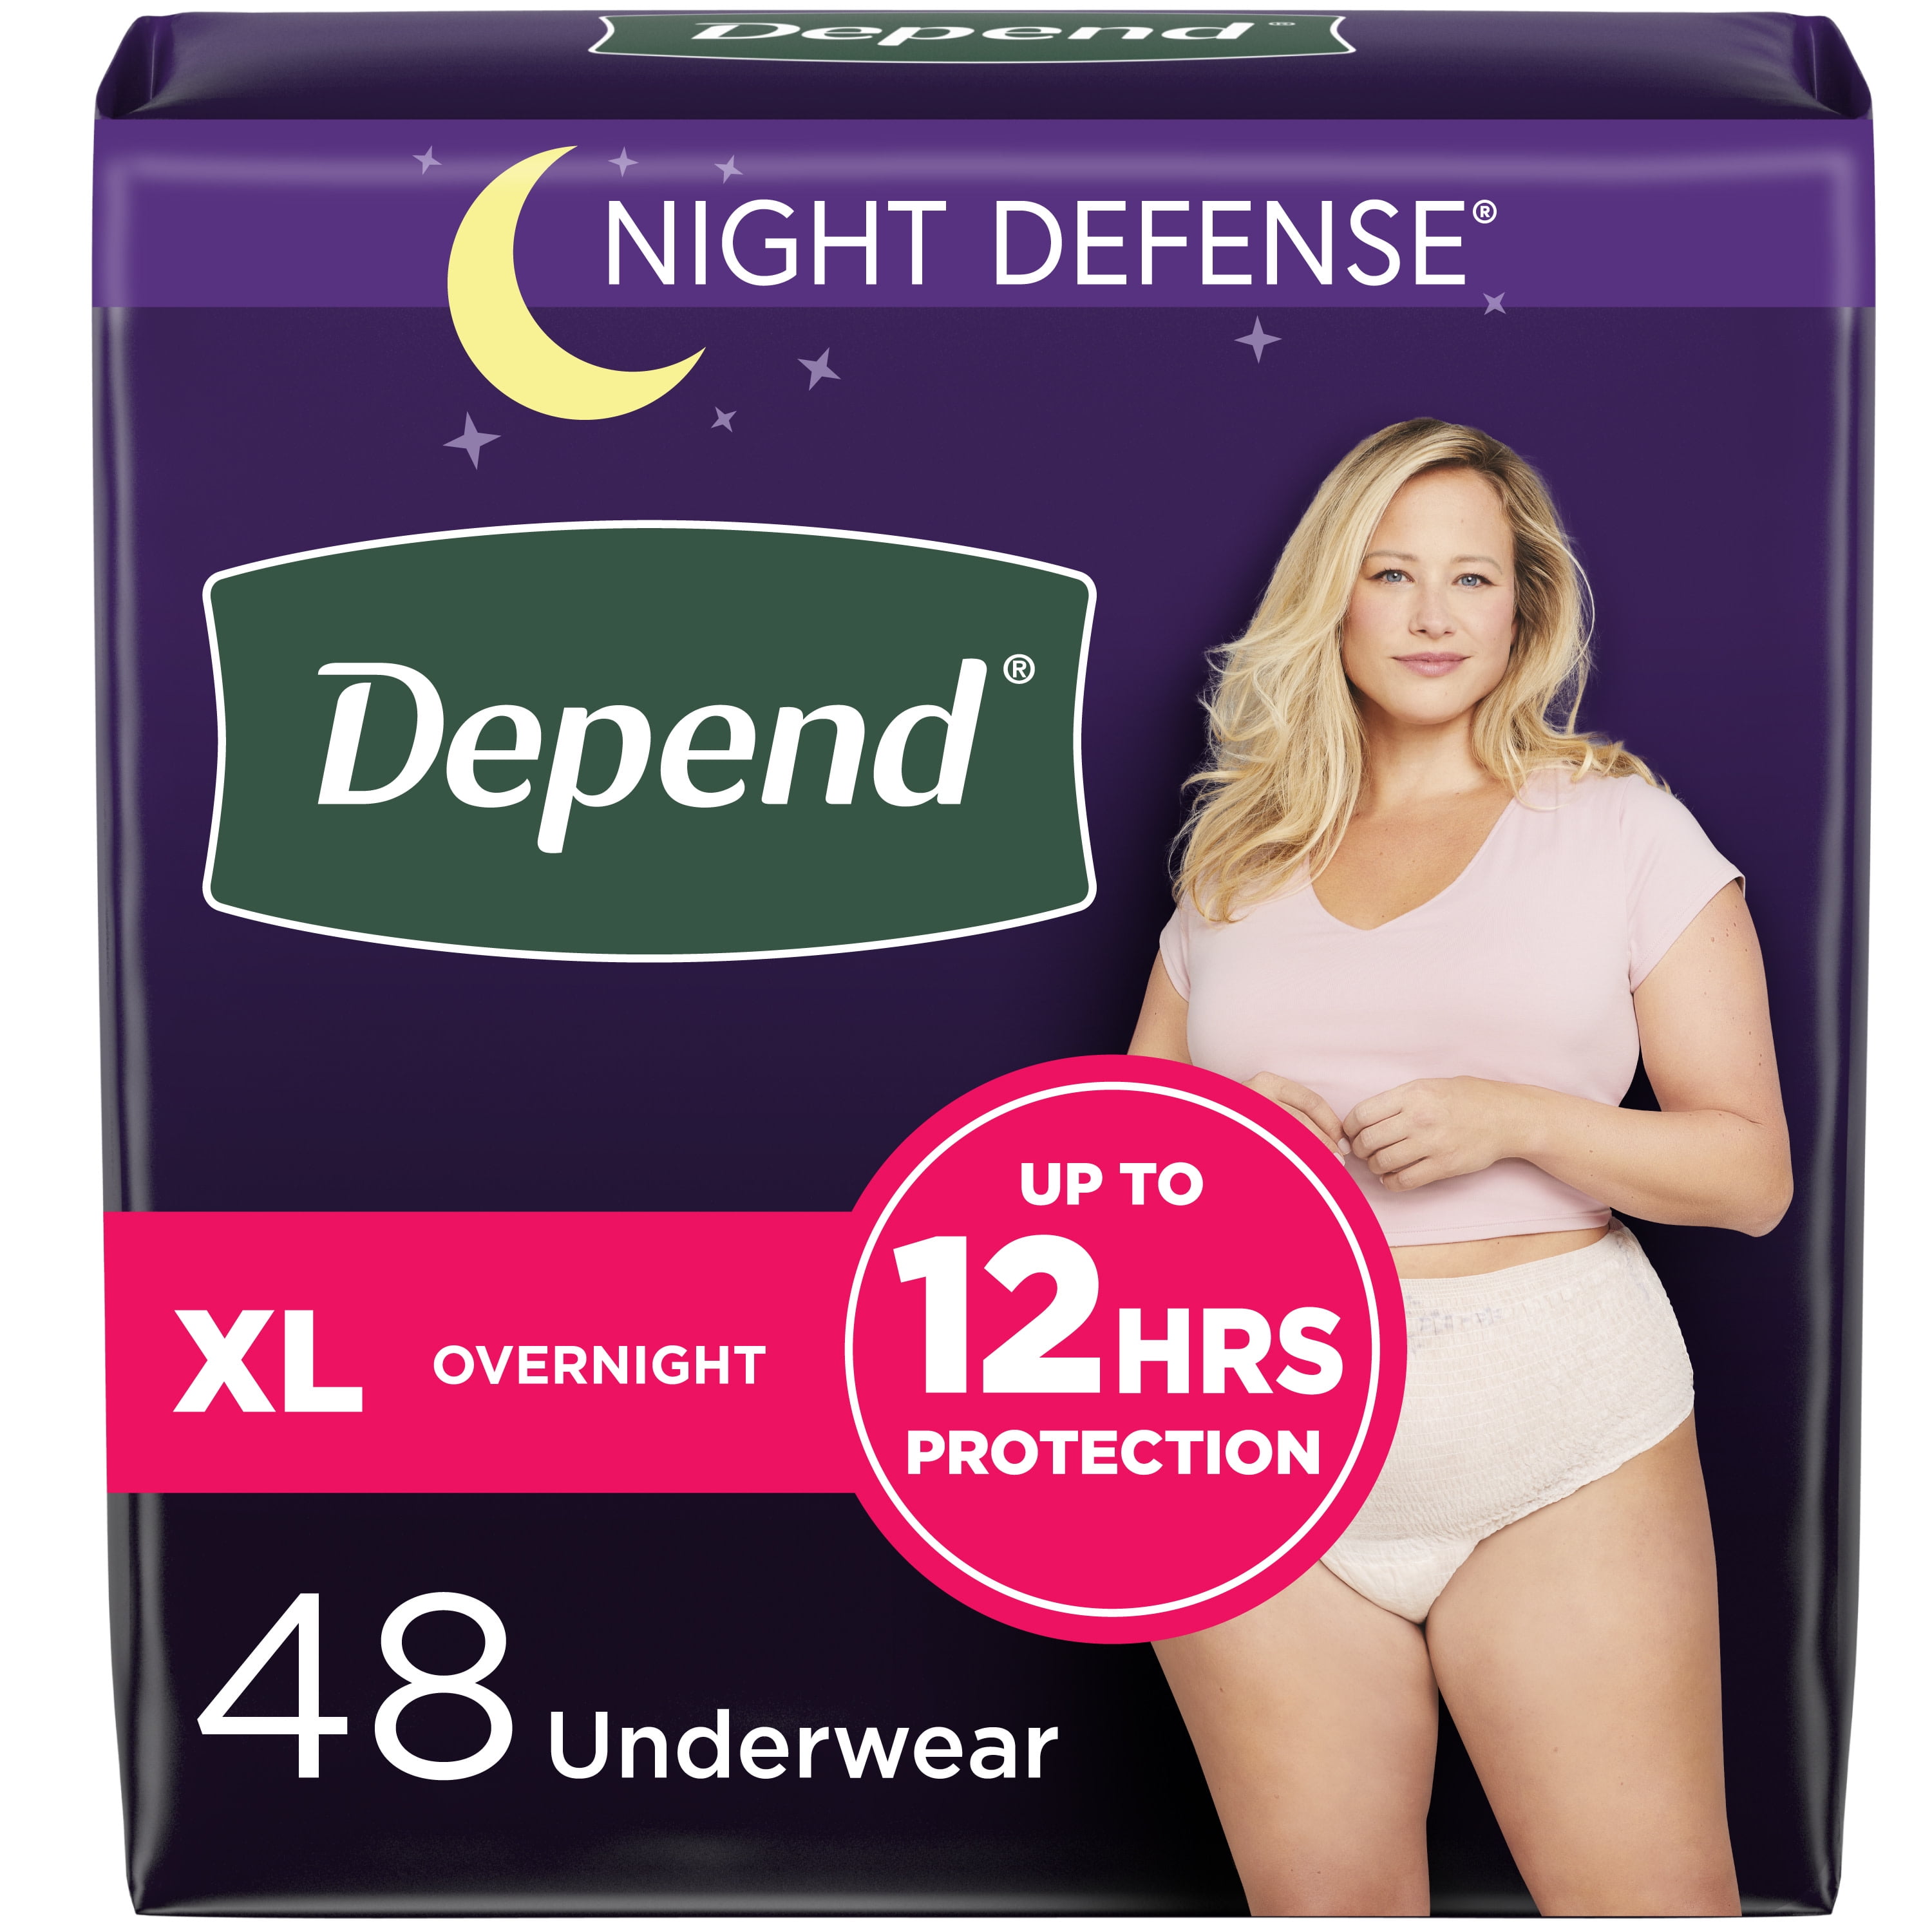 FitRight Fresh Start Incontinence Underwear for Women, Ultimate